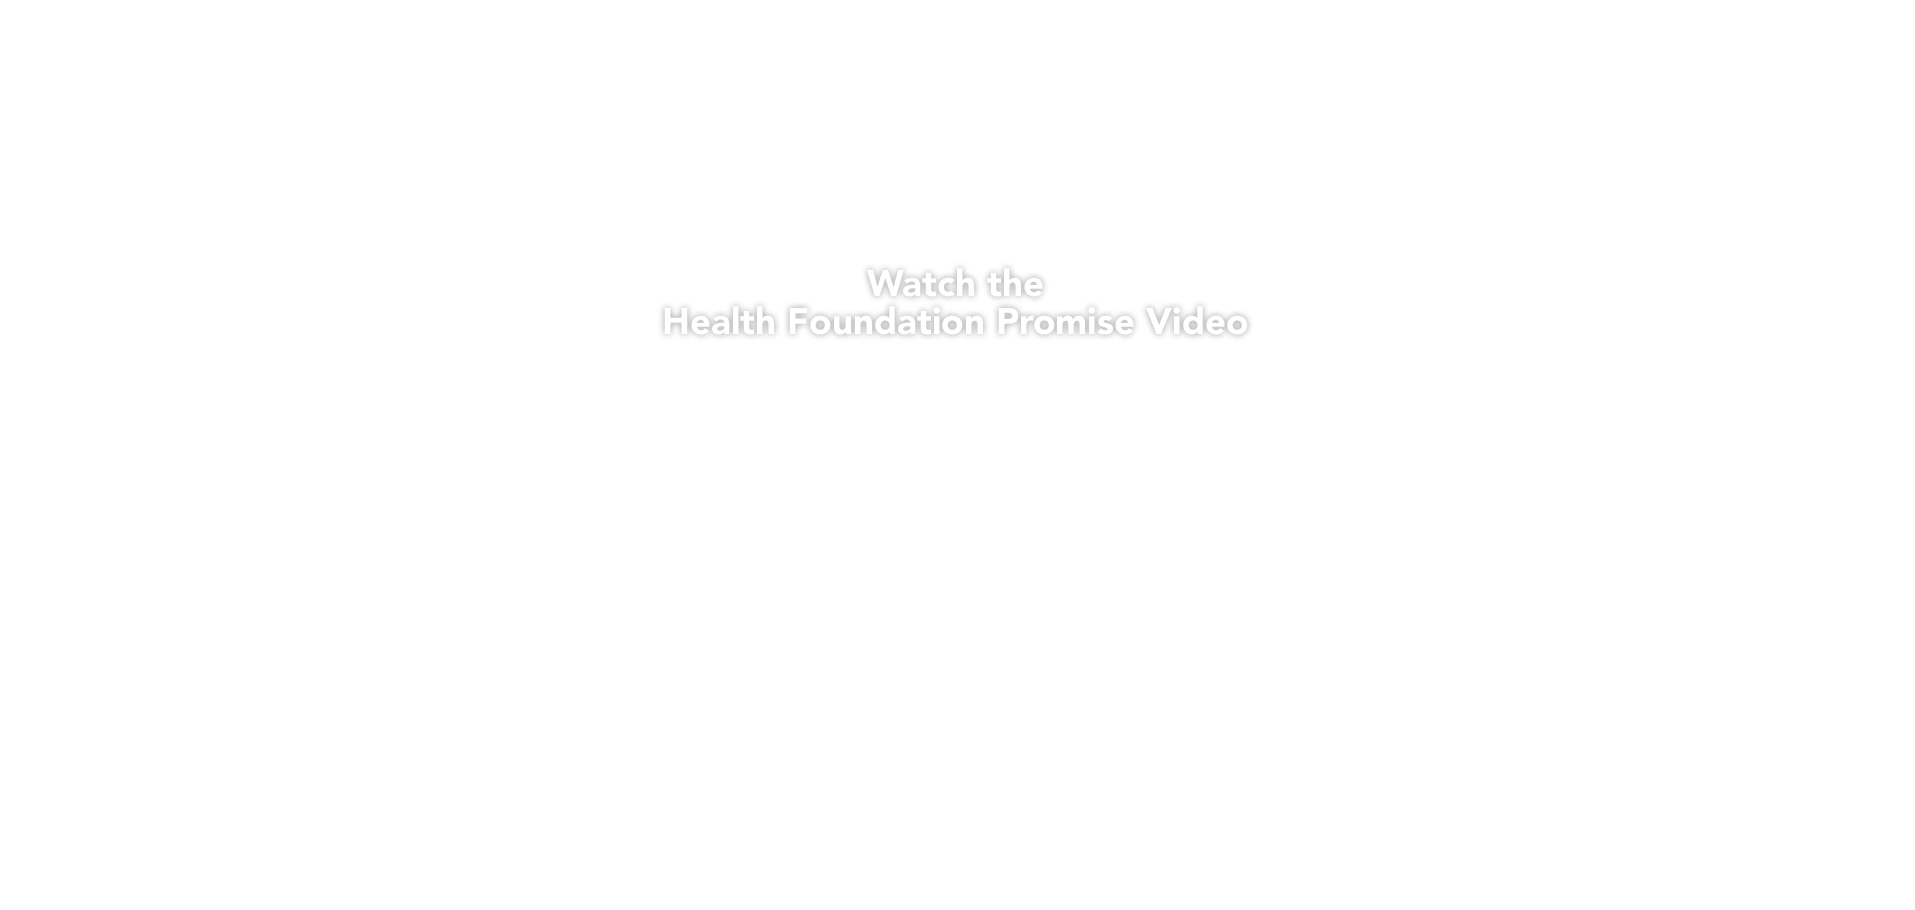 Watch our PDNHF Promise Video